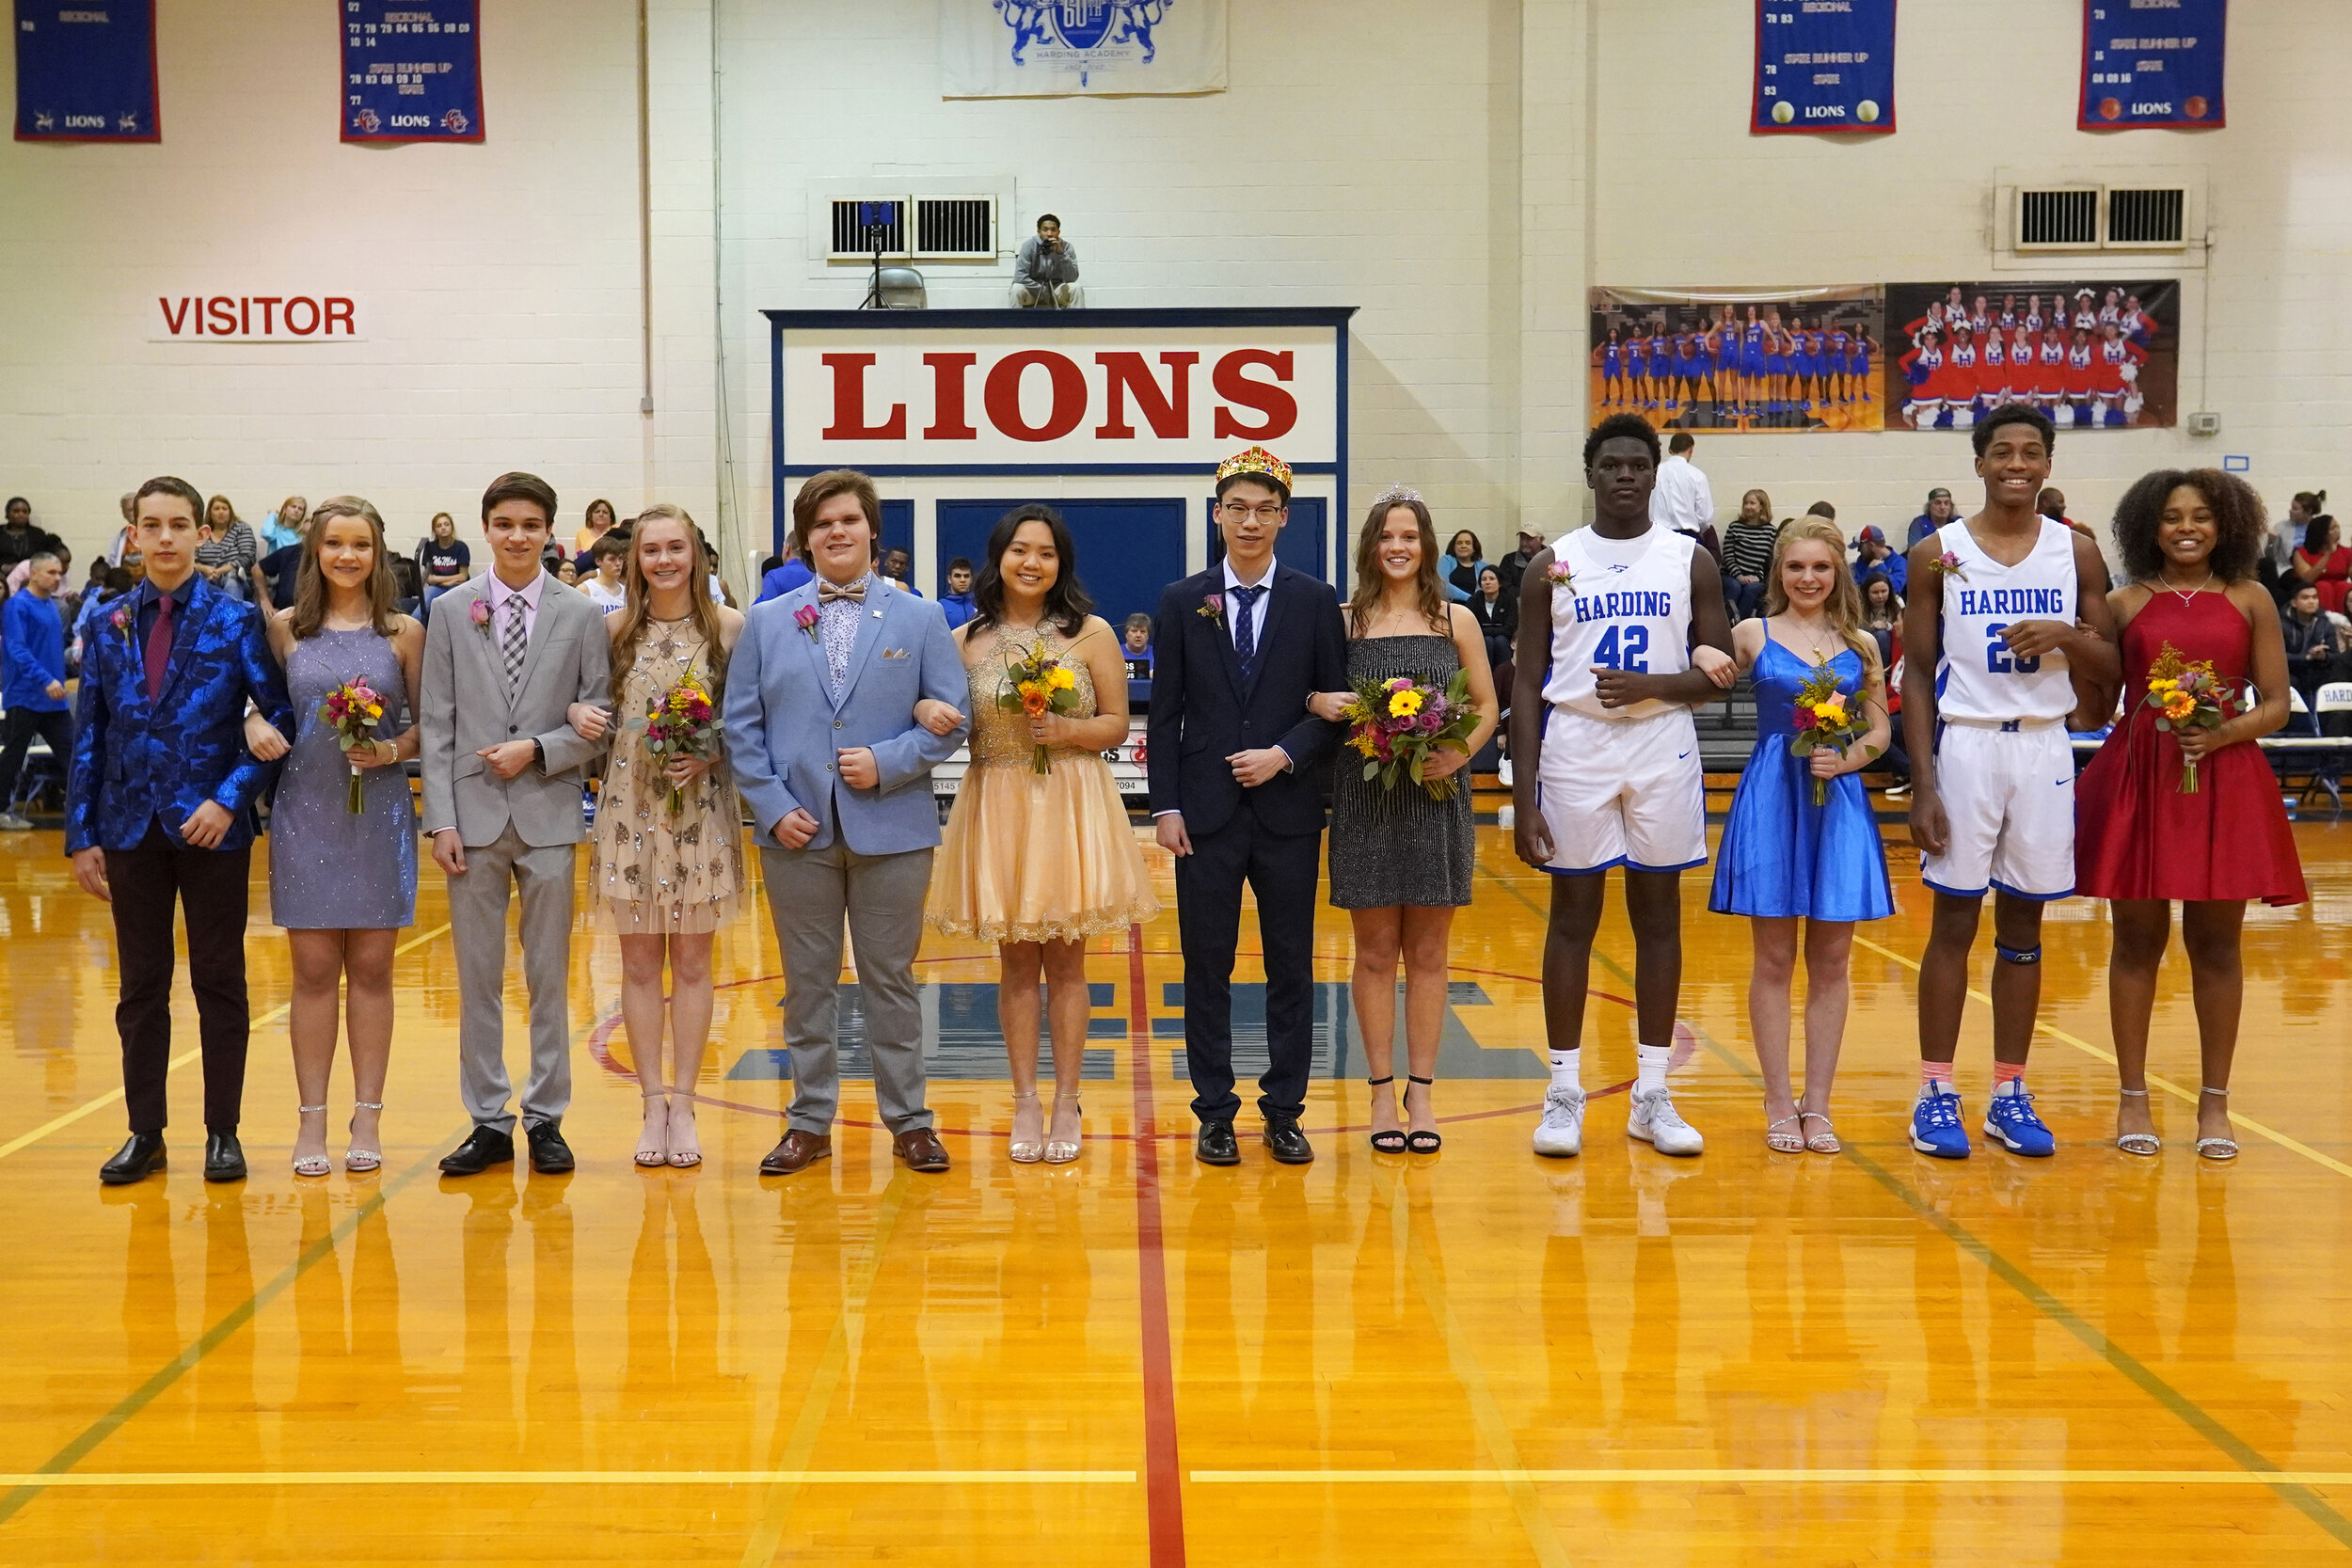 Christian Morrison and Chandler Donlin, Adam Heaton and Olivia Parkhurst, Michael Dumas and Catherine Vo, Dylan Ouyang and Mary Paige Rowsey, Morona Ali and Madison Chase, Jaxon Toney and Kylie Black